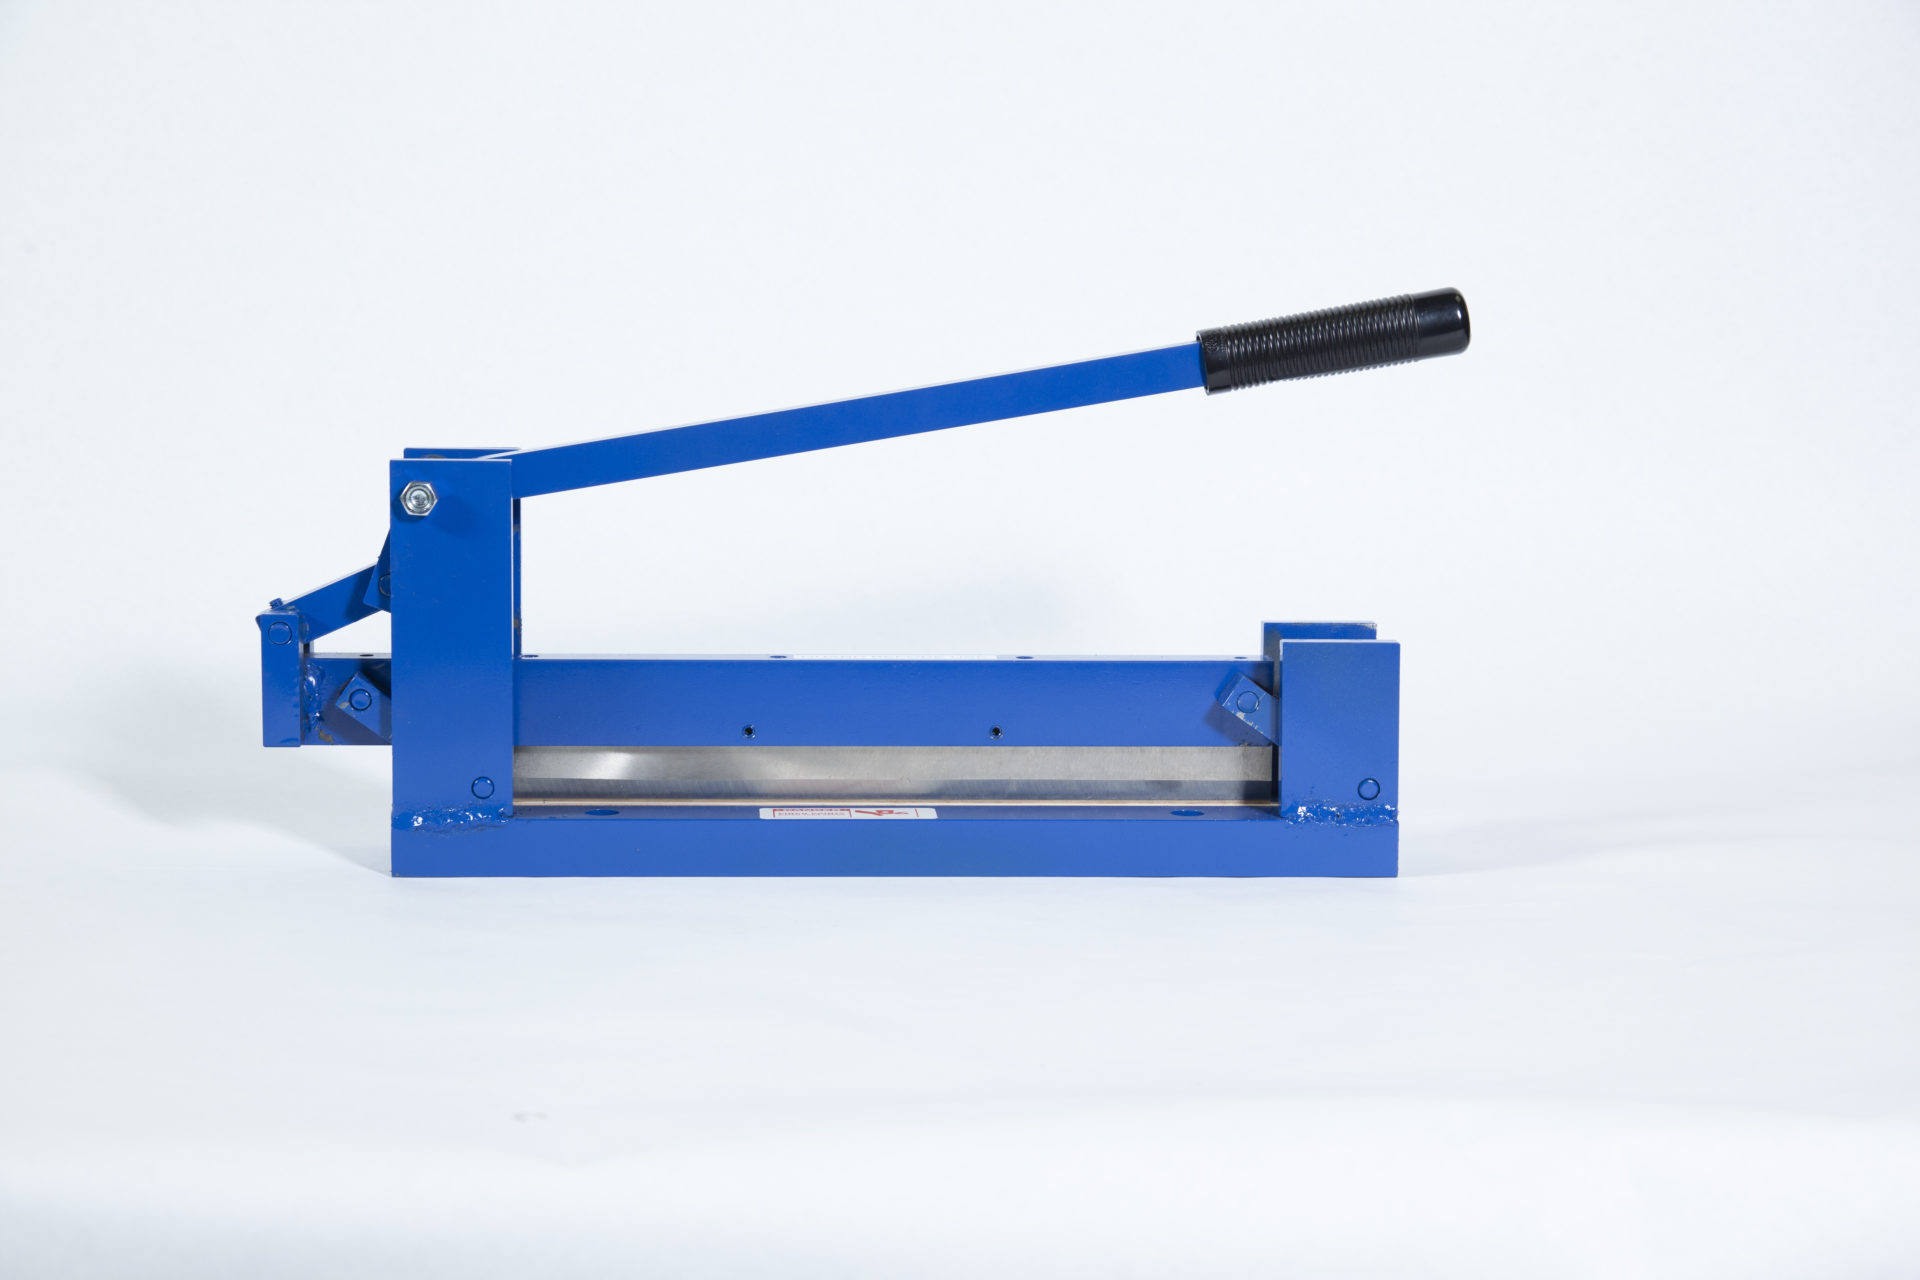 SMACO Cantilever Cutter